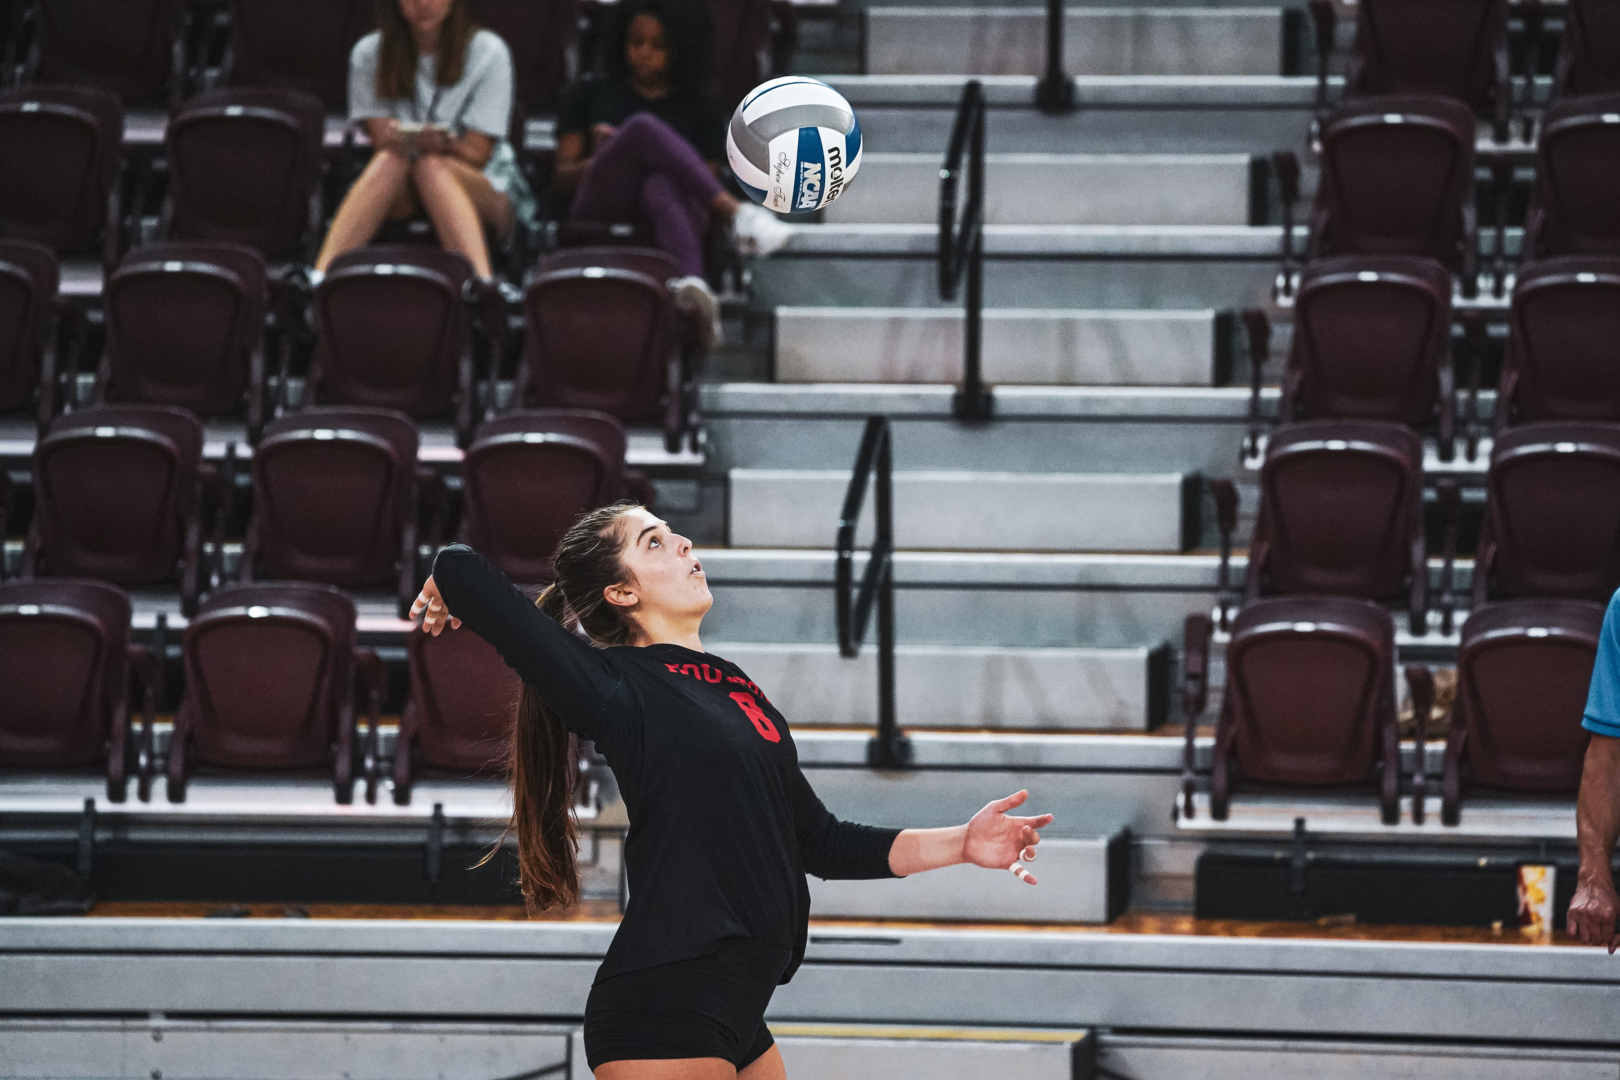 Senior middle blocker Isabel Theut rises up for a serve during a 2021 UH volleyball match. | Courtesy of UH athletics